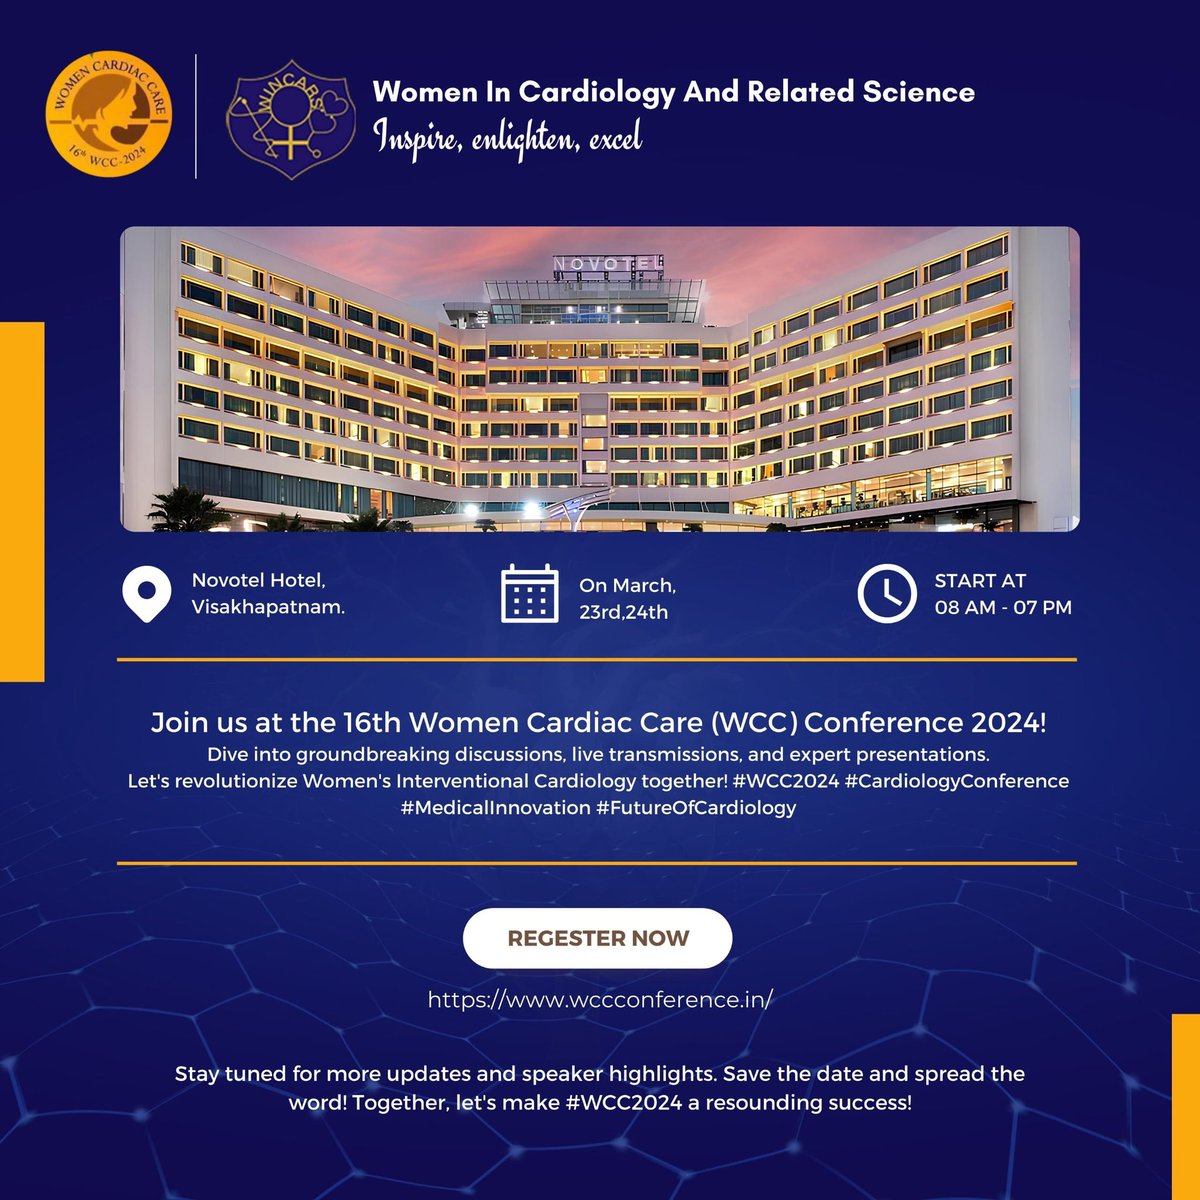 🌟 Exciting News! 🌟 We're thrilled to announce the 16th Women Cardiac Care (WCC) Conference 2024, organized by the Women in Cardiology and Related Sciences (WINCARS) Association! Set to take place on March 23rd-24th, 2024, at the prestigious Novotel Hotel in Visakhapatnam.